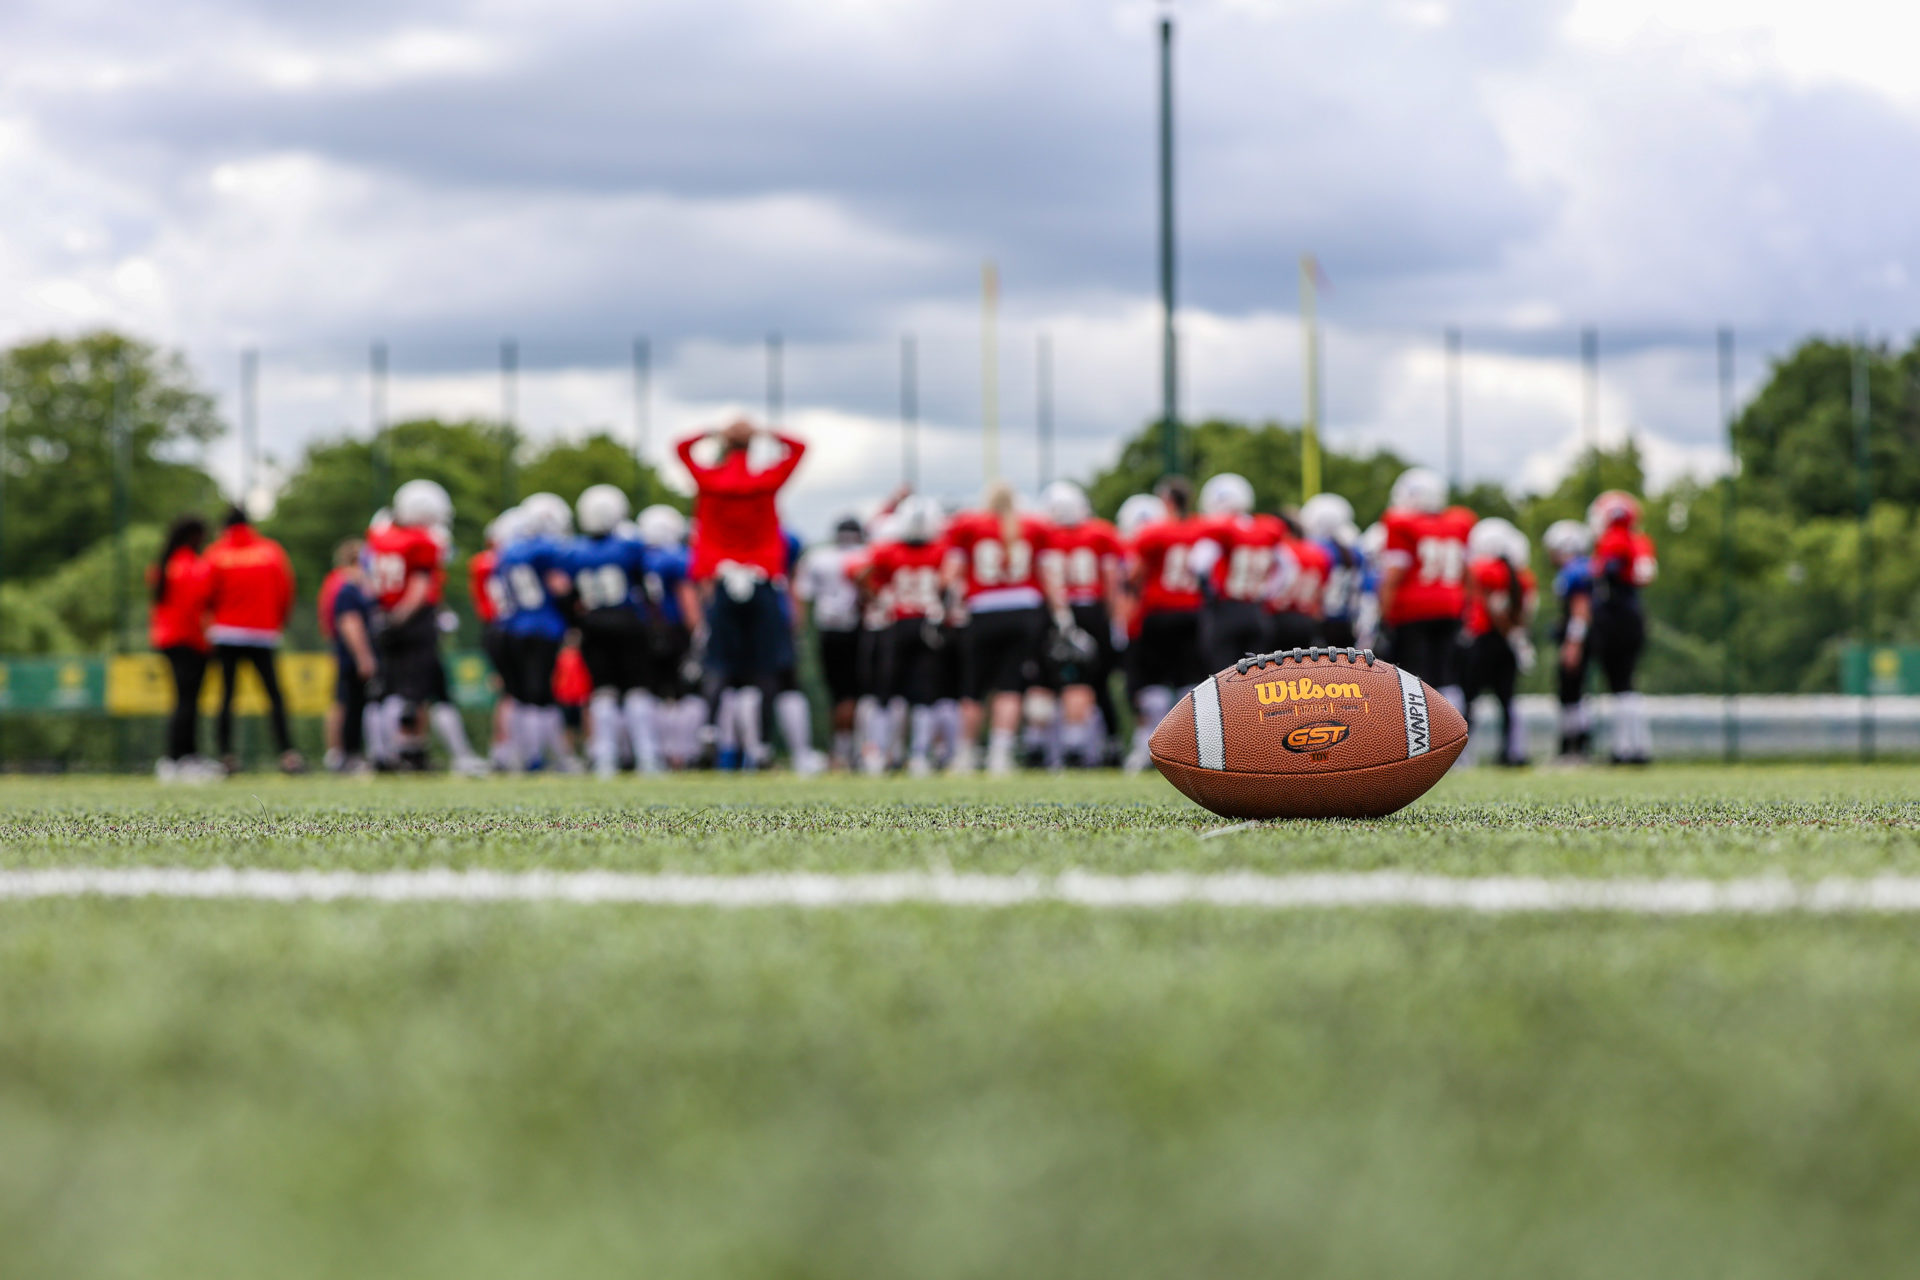 Great Britain determined to “make history” at 2022 IFAF Women’s World Championship